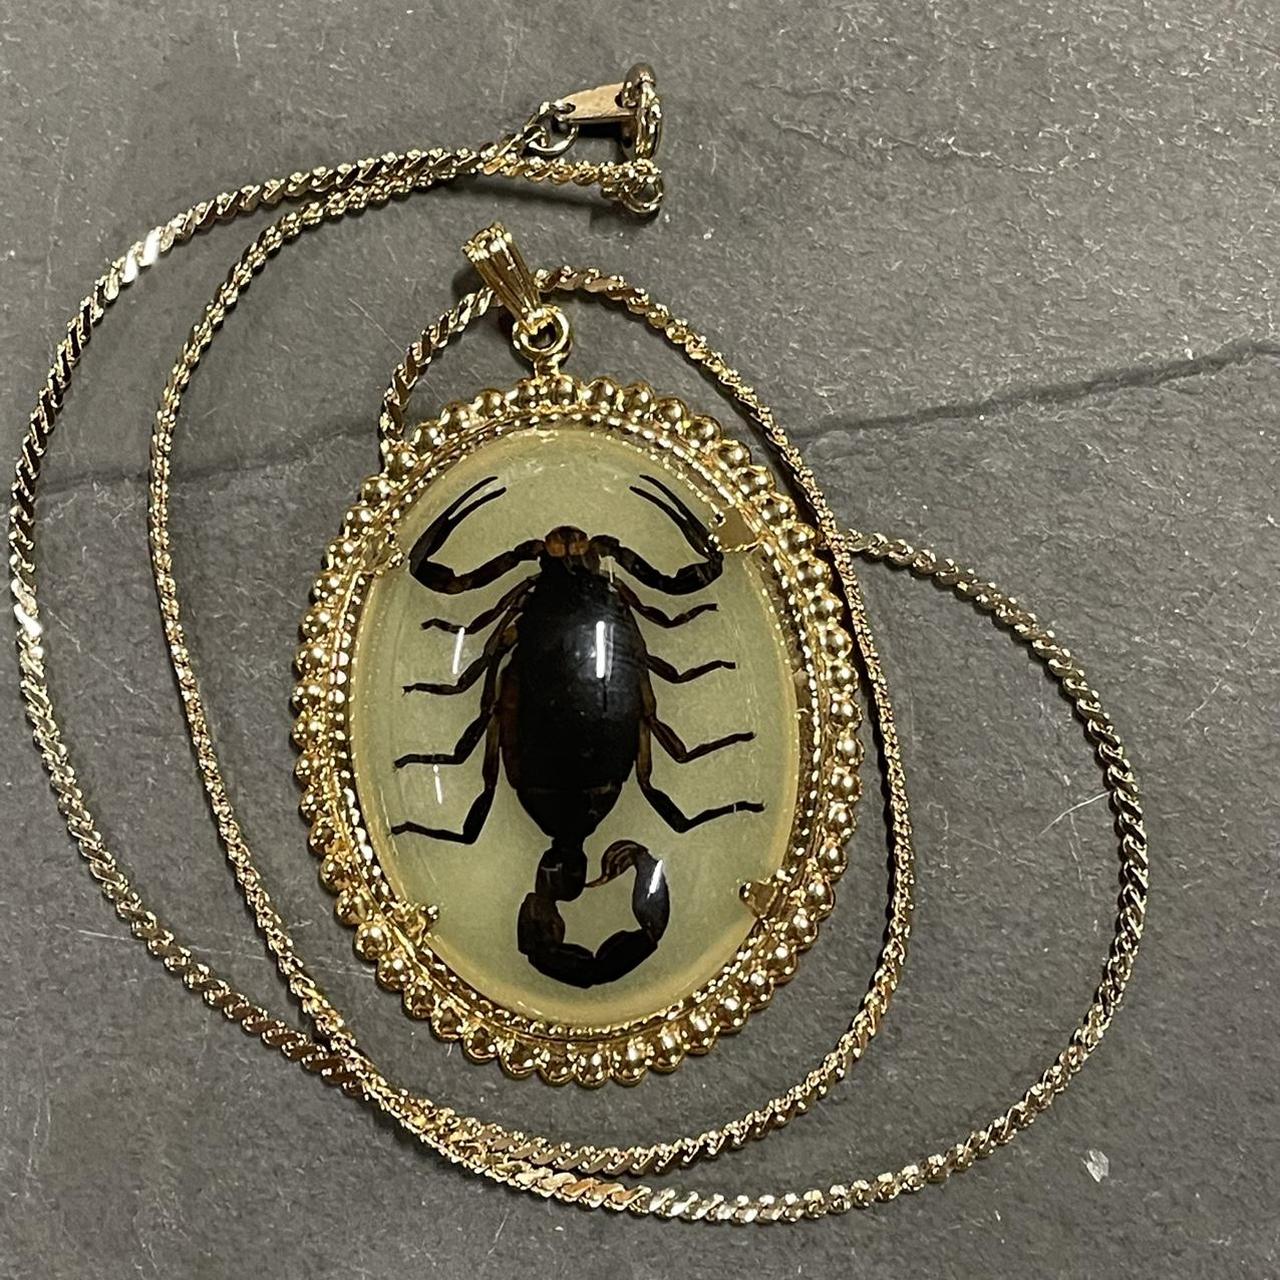 New! Real INSECT Brown SCORPION NECKLACE Teardrop Jewelry CLEAR PENDANT -  La Paz County Sheriff's Office 